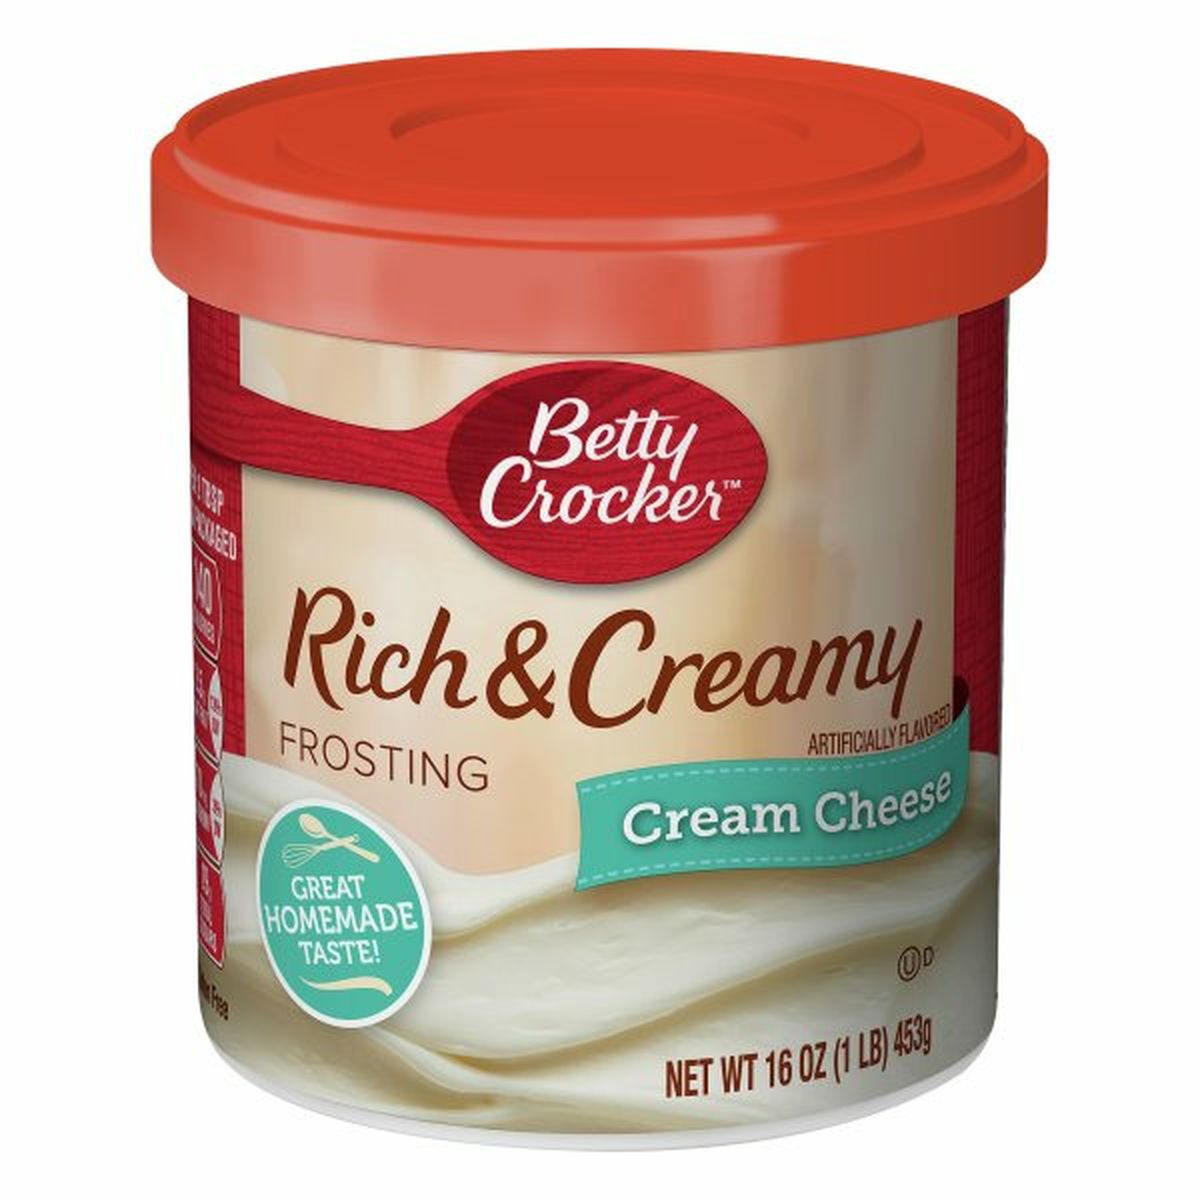 Calories in Betty Crocker Frosting, Rich & Creamy, Cream Cheese